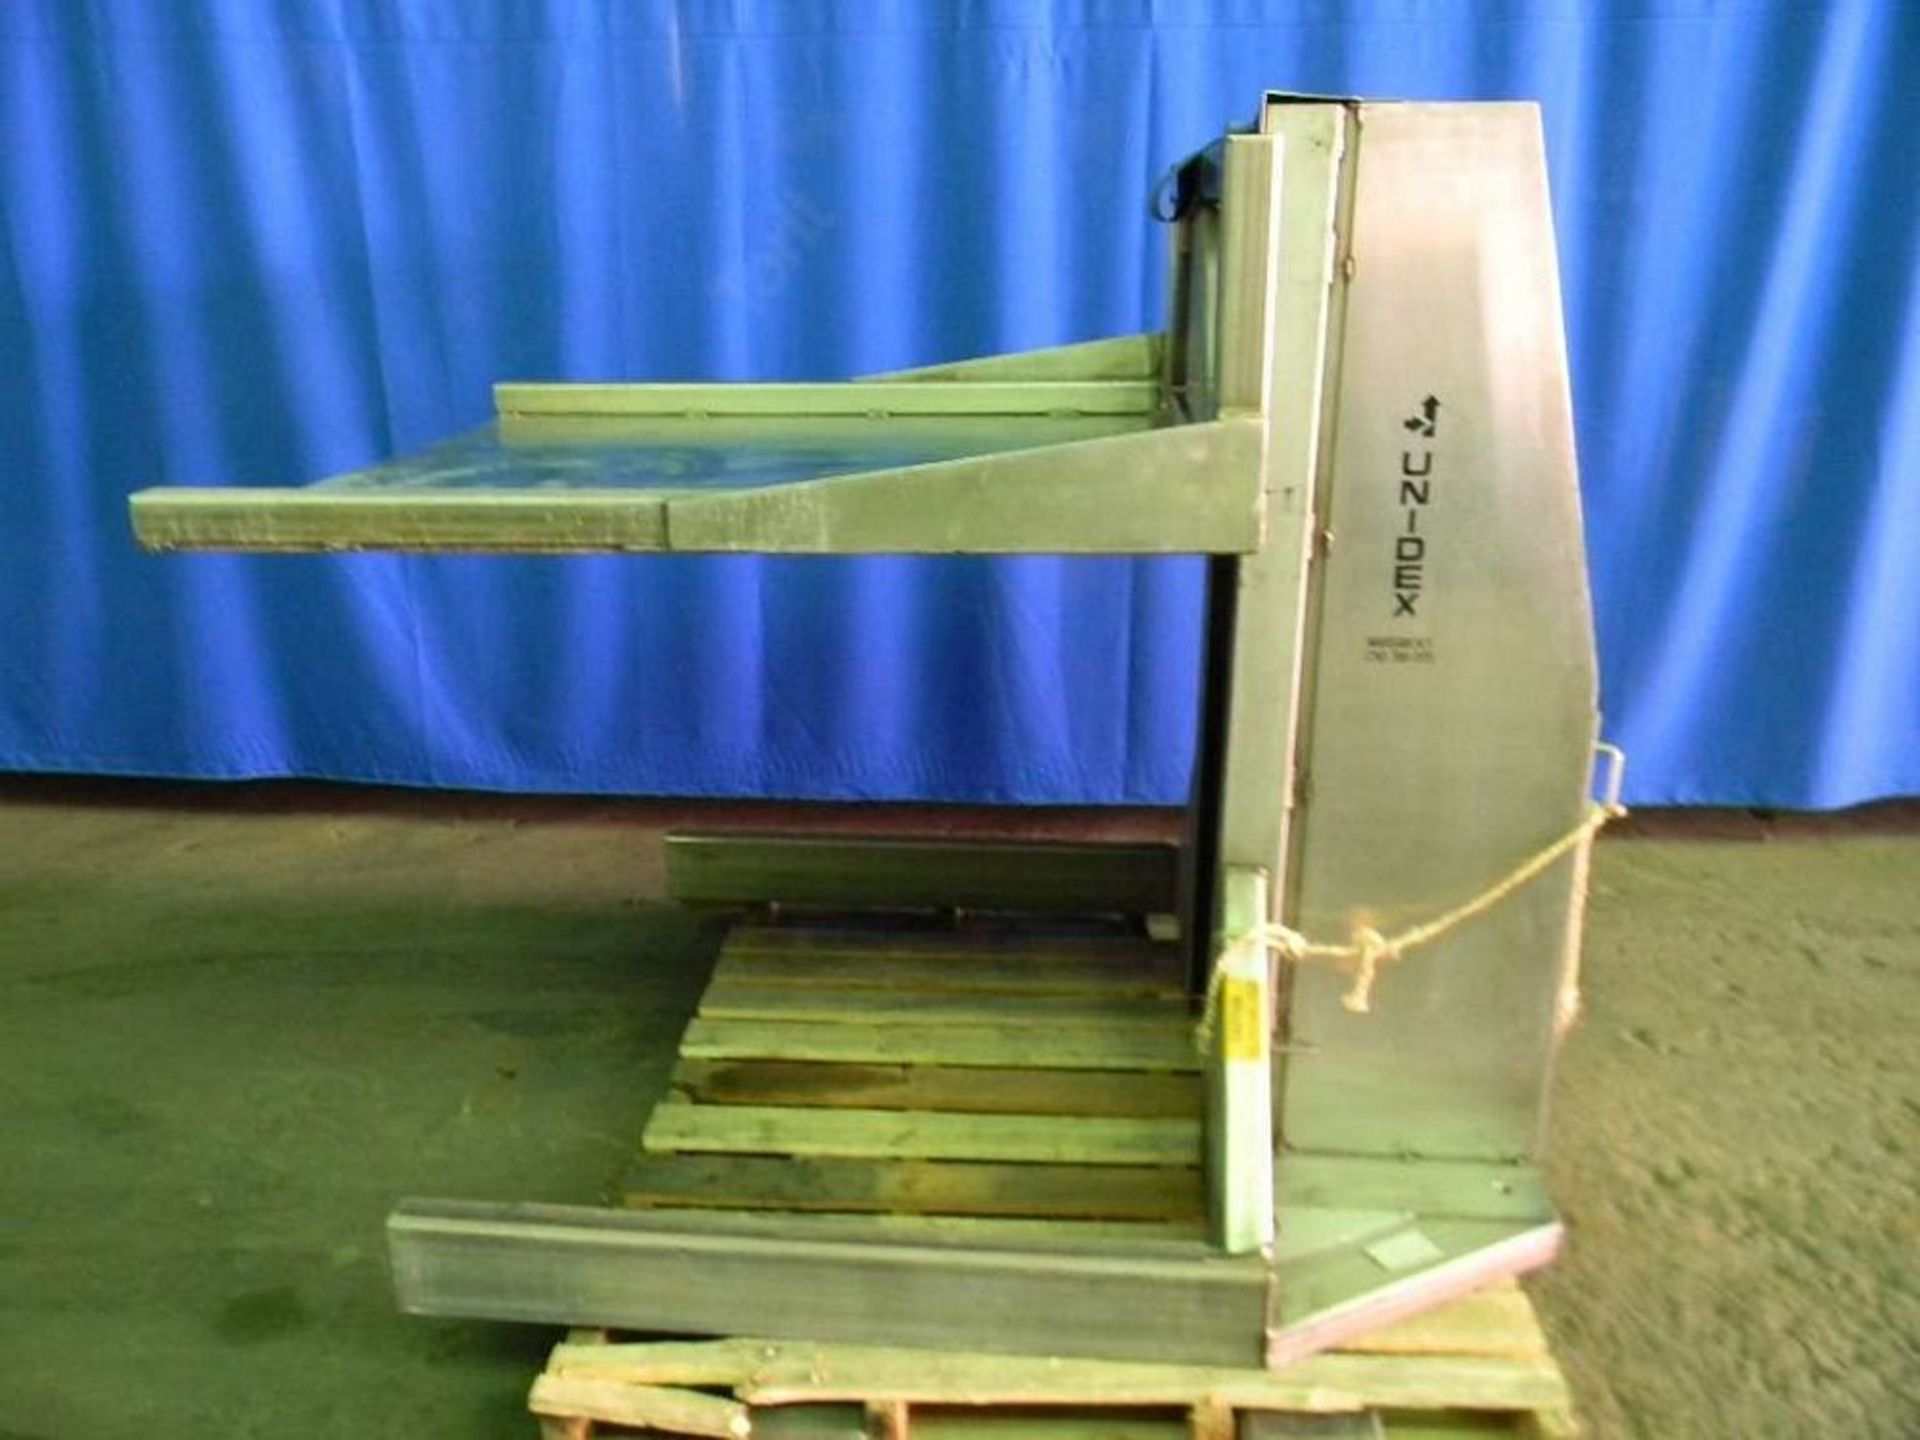 Qty (1) Unidex Stainless Pallet Elevator - All stainless steel pallet lift. - Platform 38' wide x - Image 4 of 4